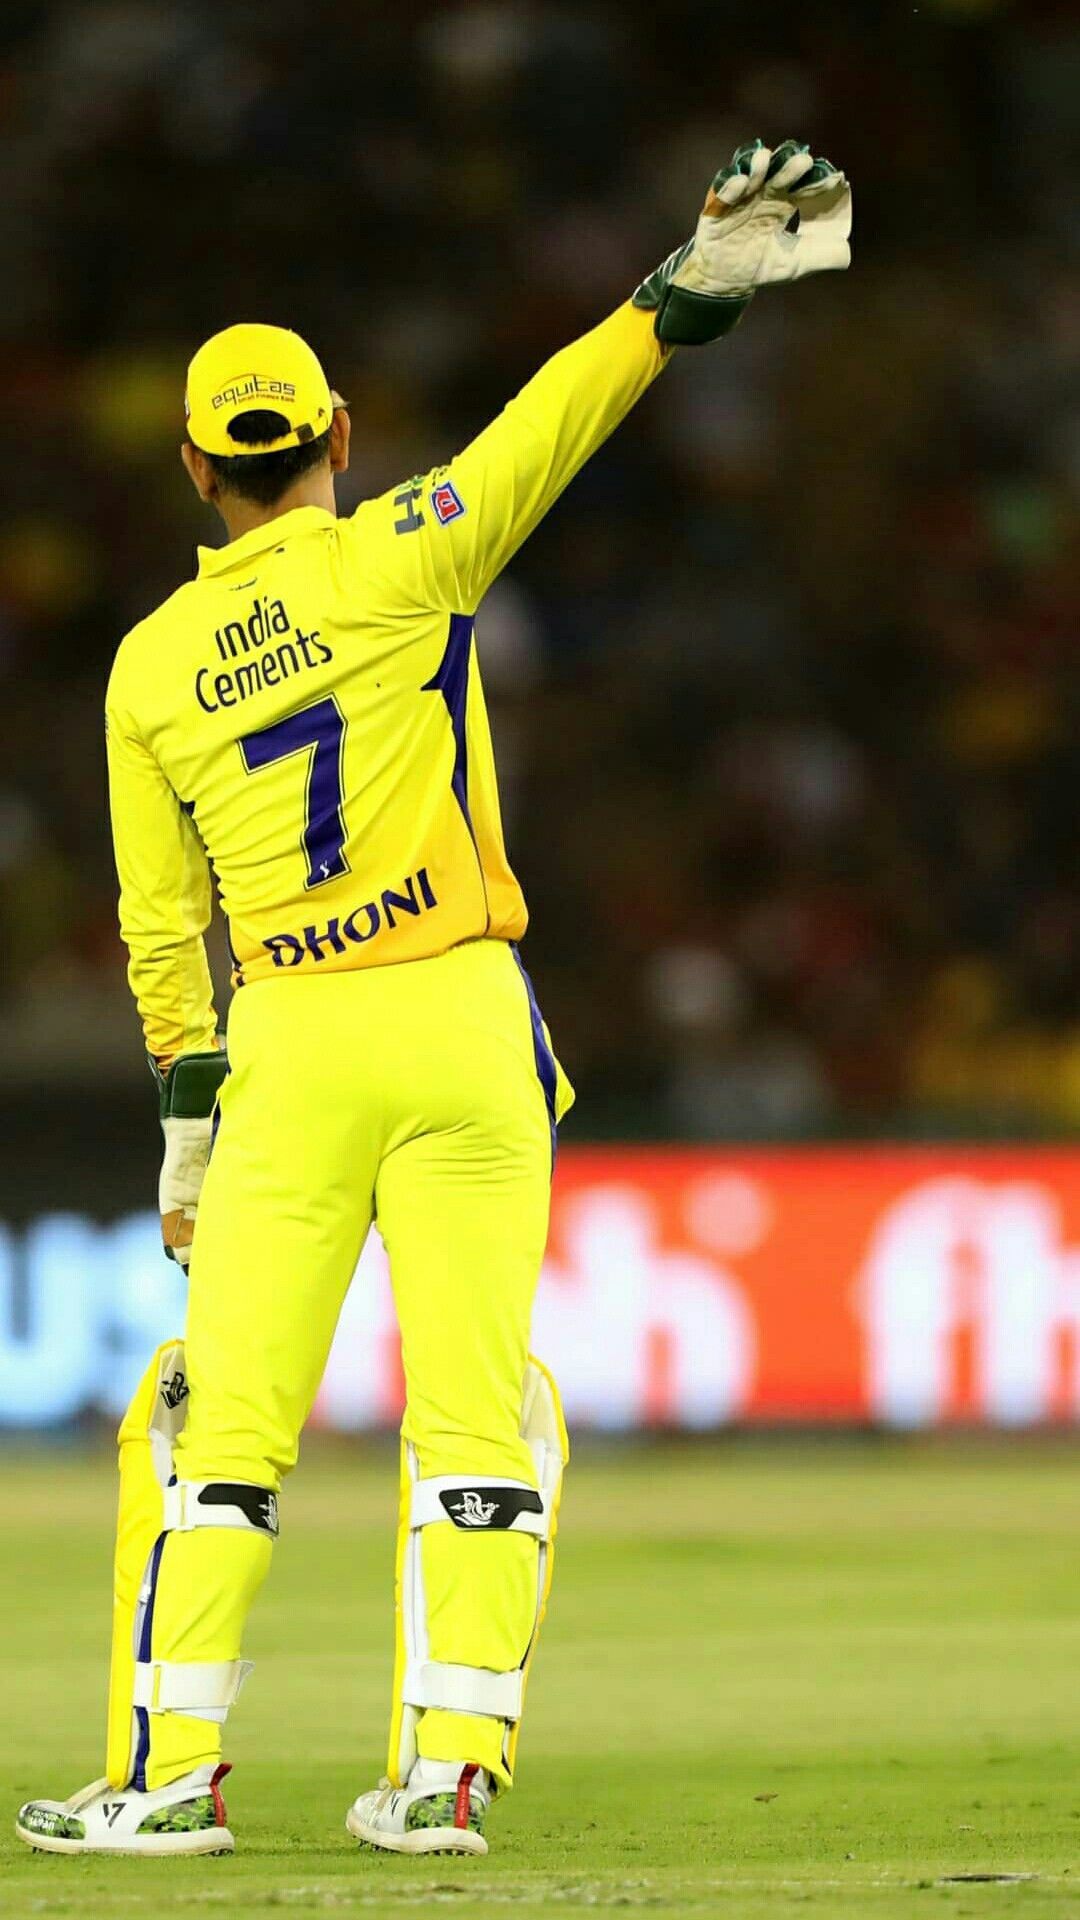 Top 8 Csk Wallpapers Hd Resolution For Your Android - Hd Wallpaper Ms Dhoni Csk , HD Wallpaper & Backgrounds